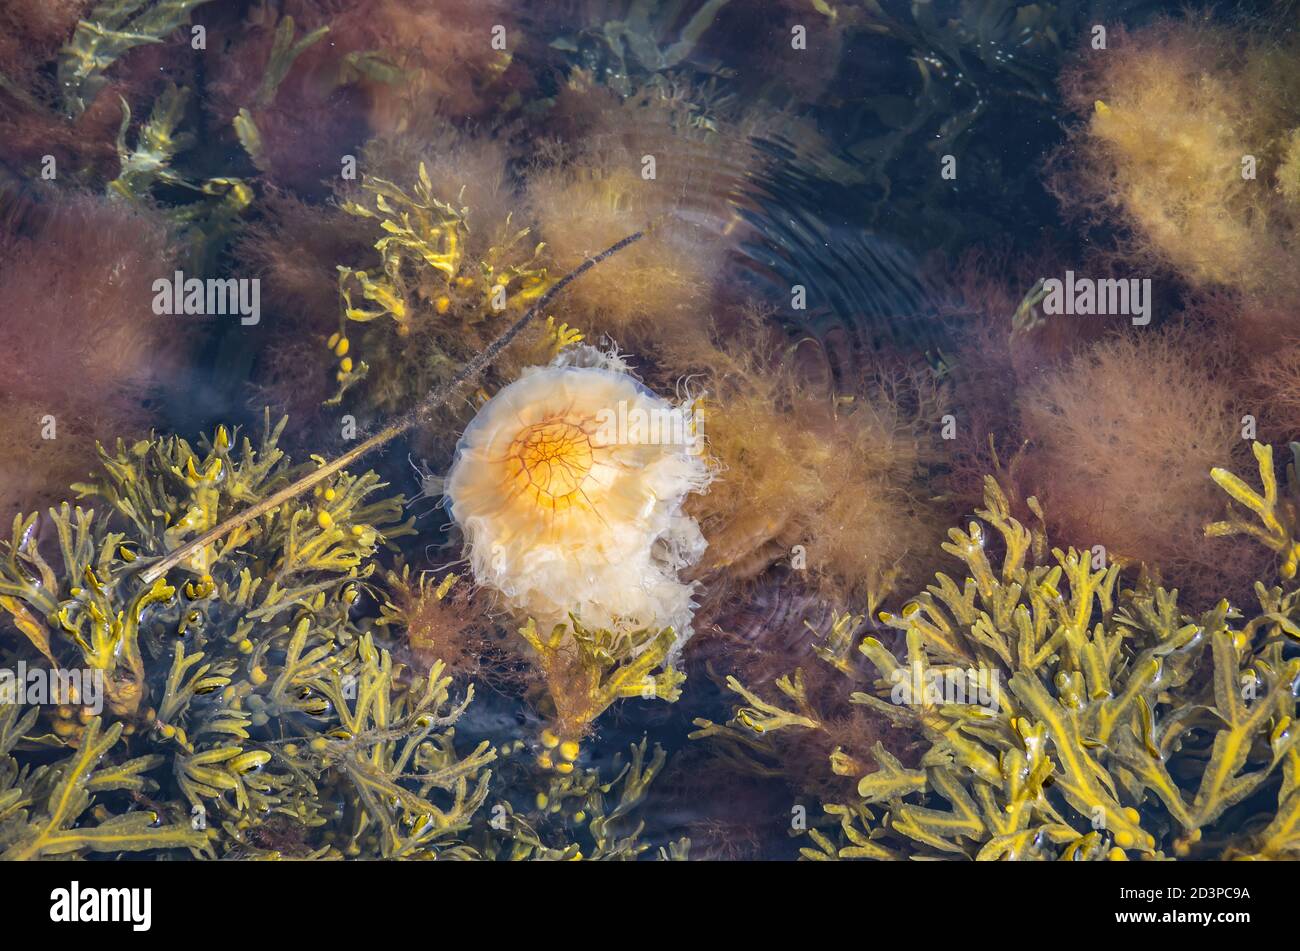 Lion's mane jellyfish, Cyanea capillata, in shallow waters surrounded by seaweed, Bohuslan, Sweden. Stock Photo